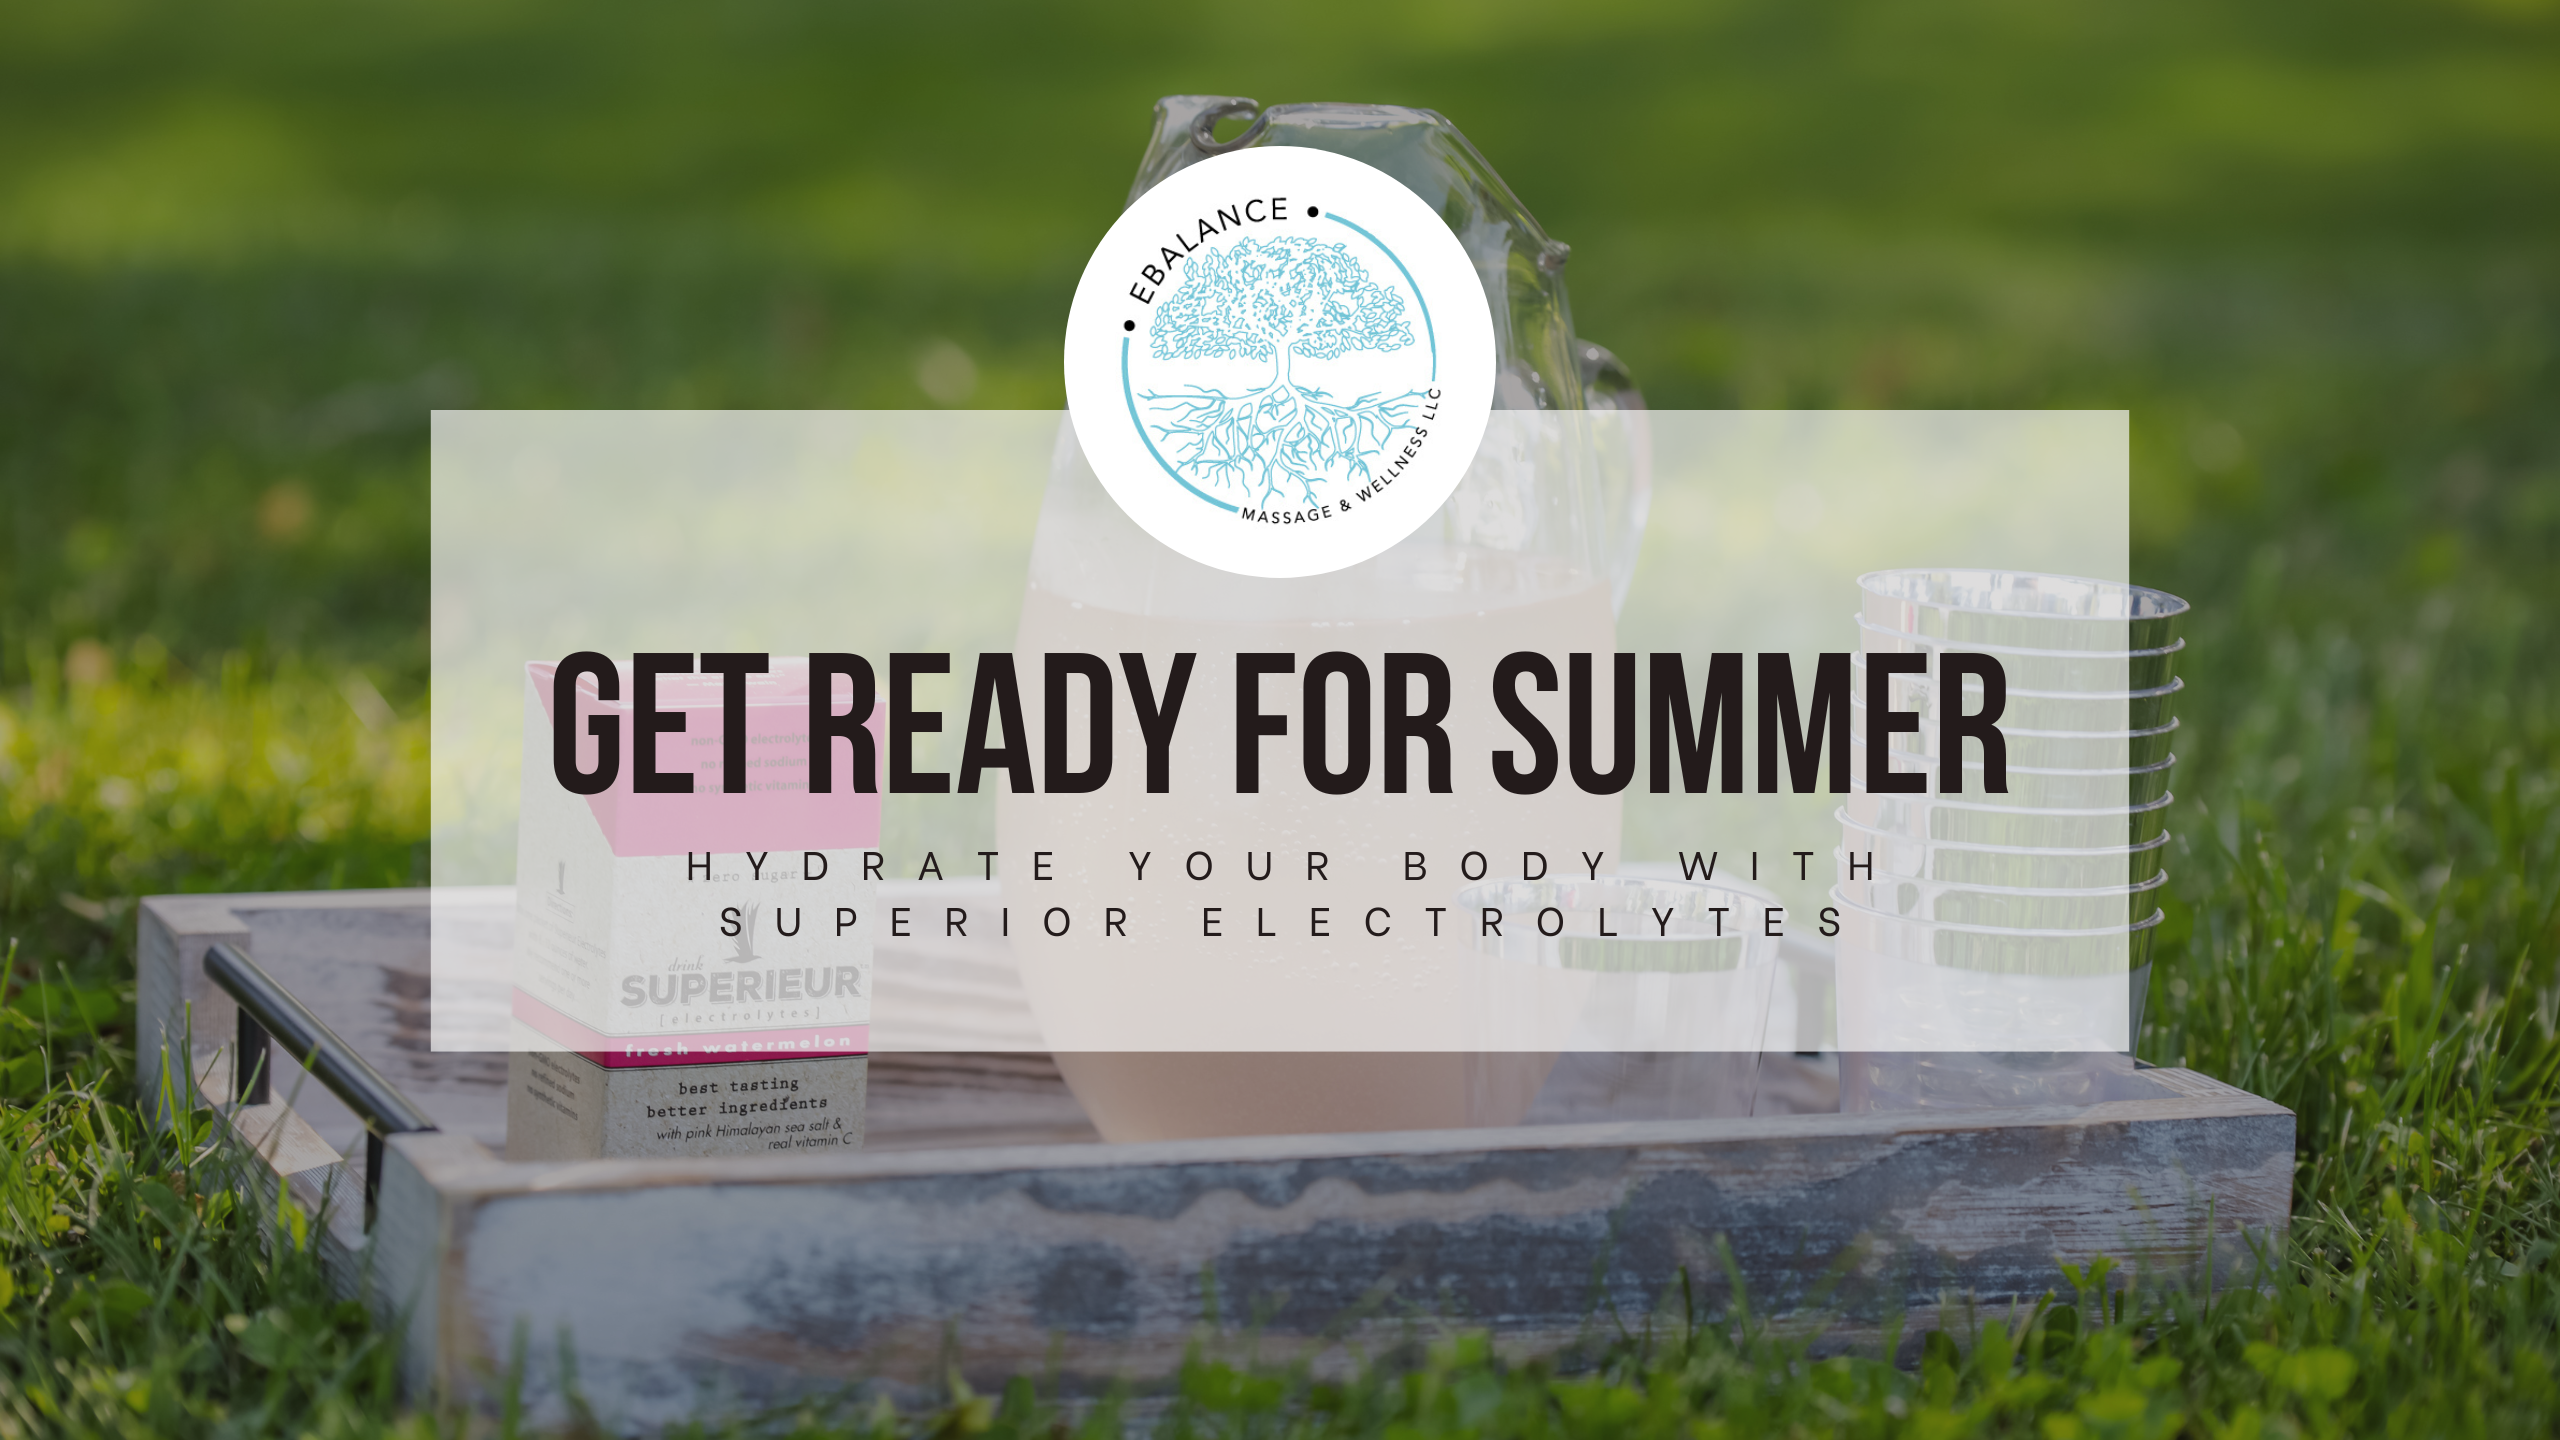 June is finally here and at Ebalance we're getting ready to enjoy the summer. Our team is looking forward to sunshine and bringing Yomassage outdoors at Selner Park in Kewaunee, as well as utilizing our favorite summer products!